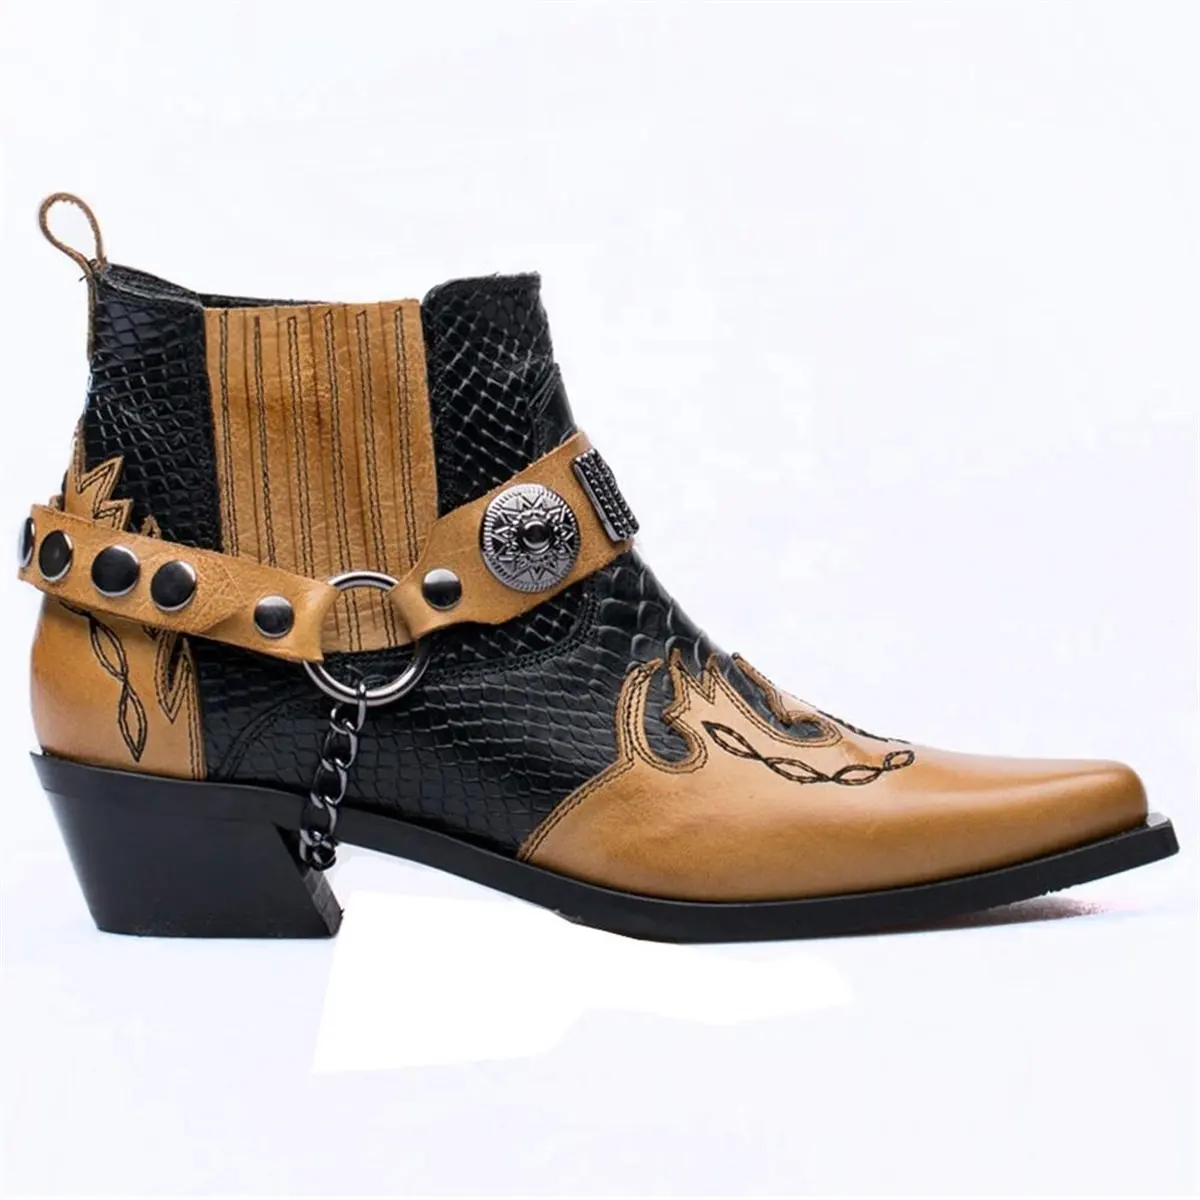 Women Cowboy Ankle Boots Western Genuine Printed Leather Pointed Toe Low Heel Stretch Boots Designer Shoes Handcraft Wholesale